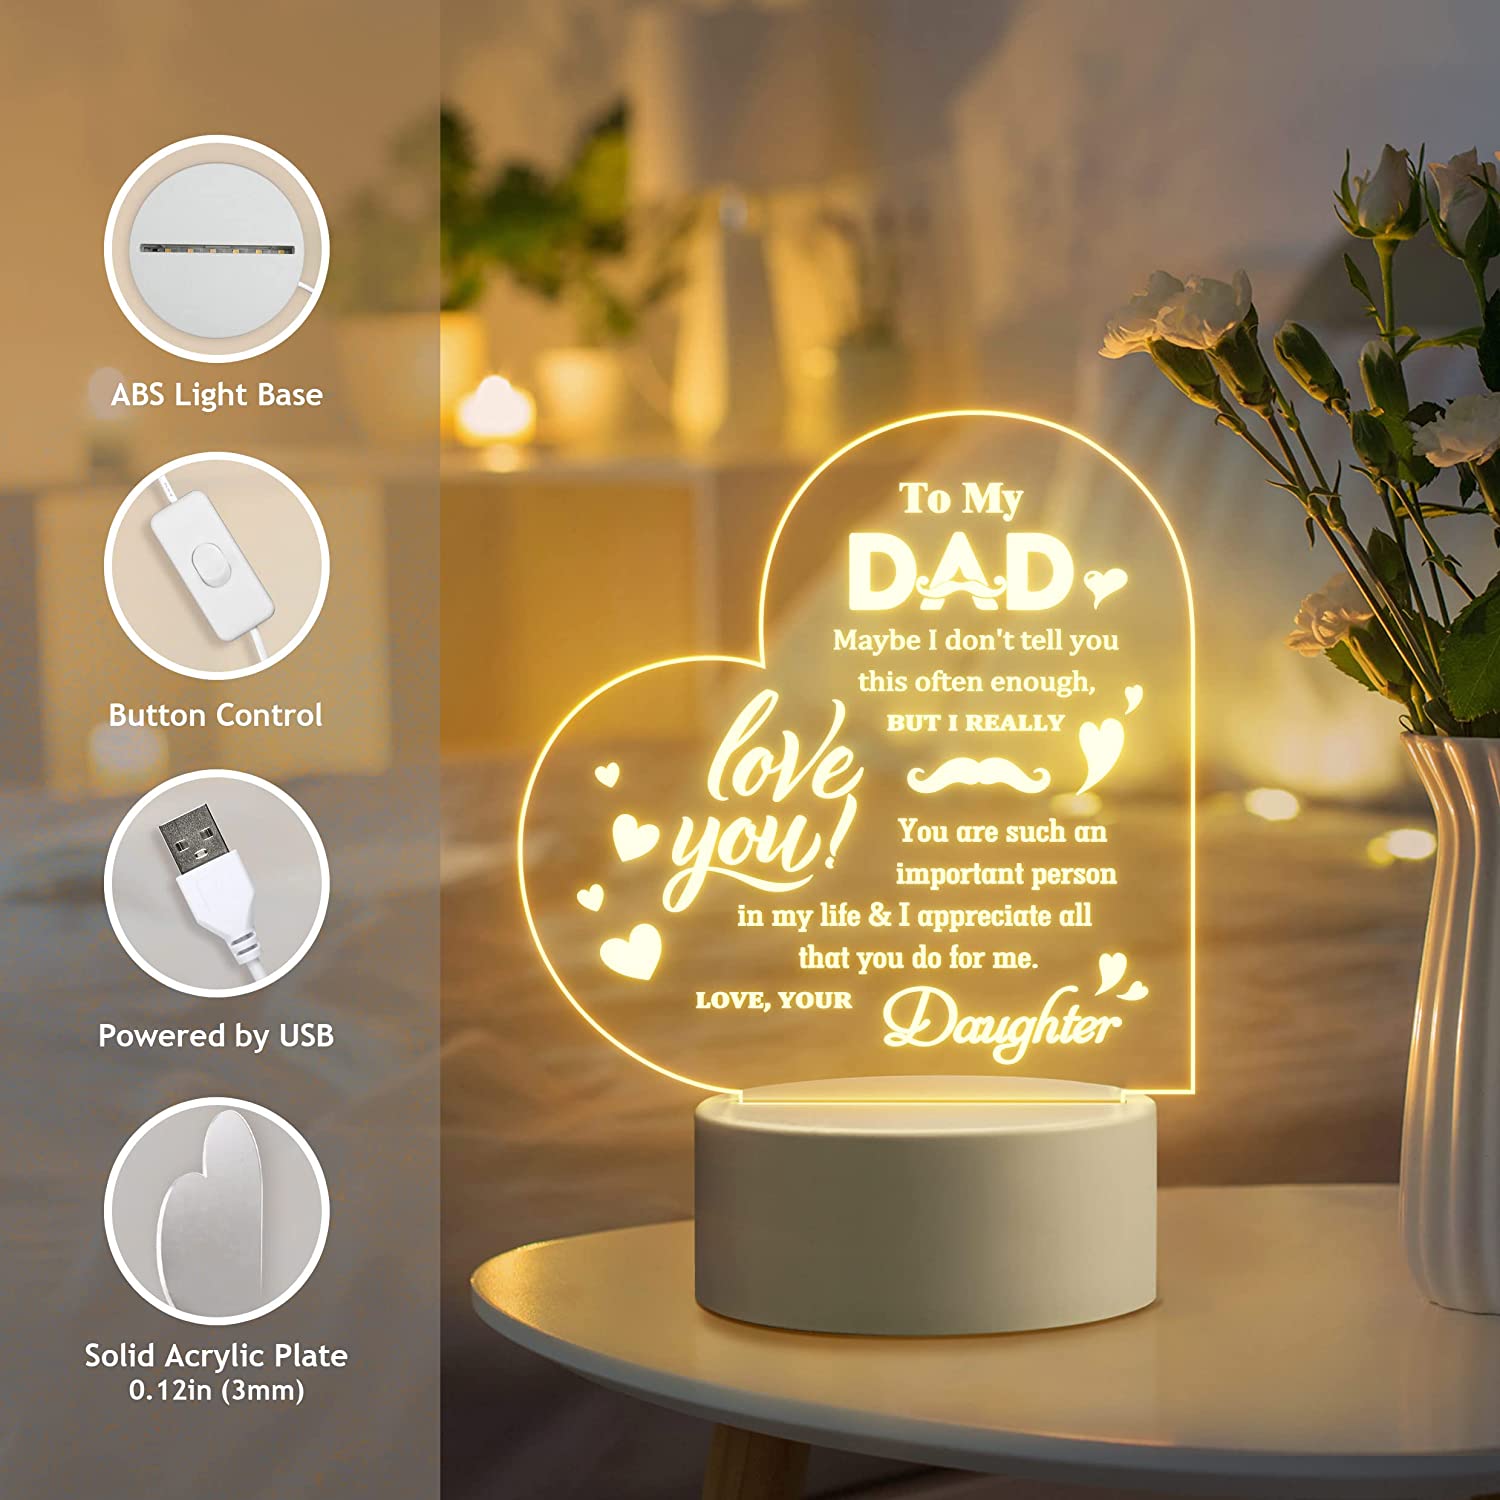 wowcugi Customized Acrylic Dad Night Light - to My Dad - Night Lamp Gifts  for Father's Day Birthday Christmas - Gifts from Daughter to Dad 